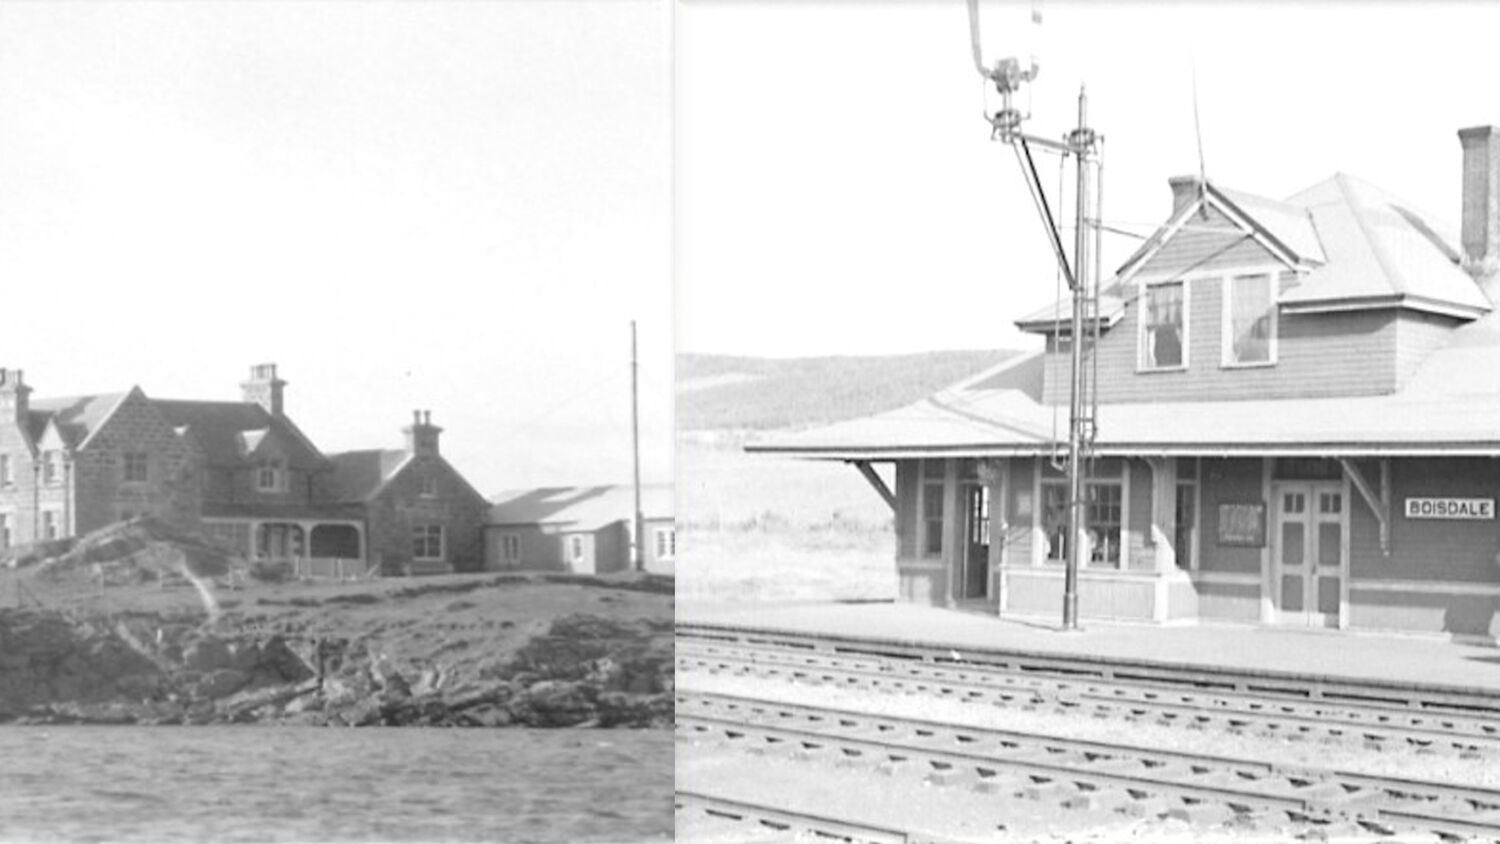 From Lochboisdale Hotel, South Uist to Boisdale Station, Nova Scotia